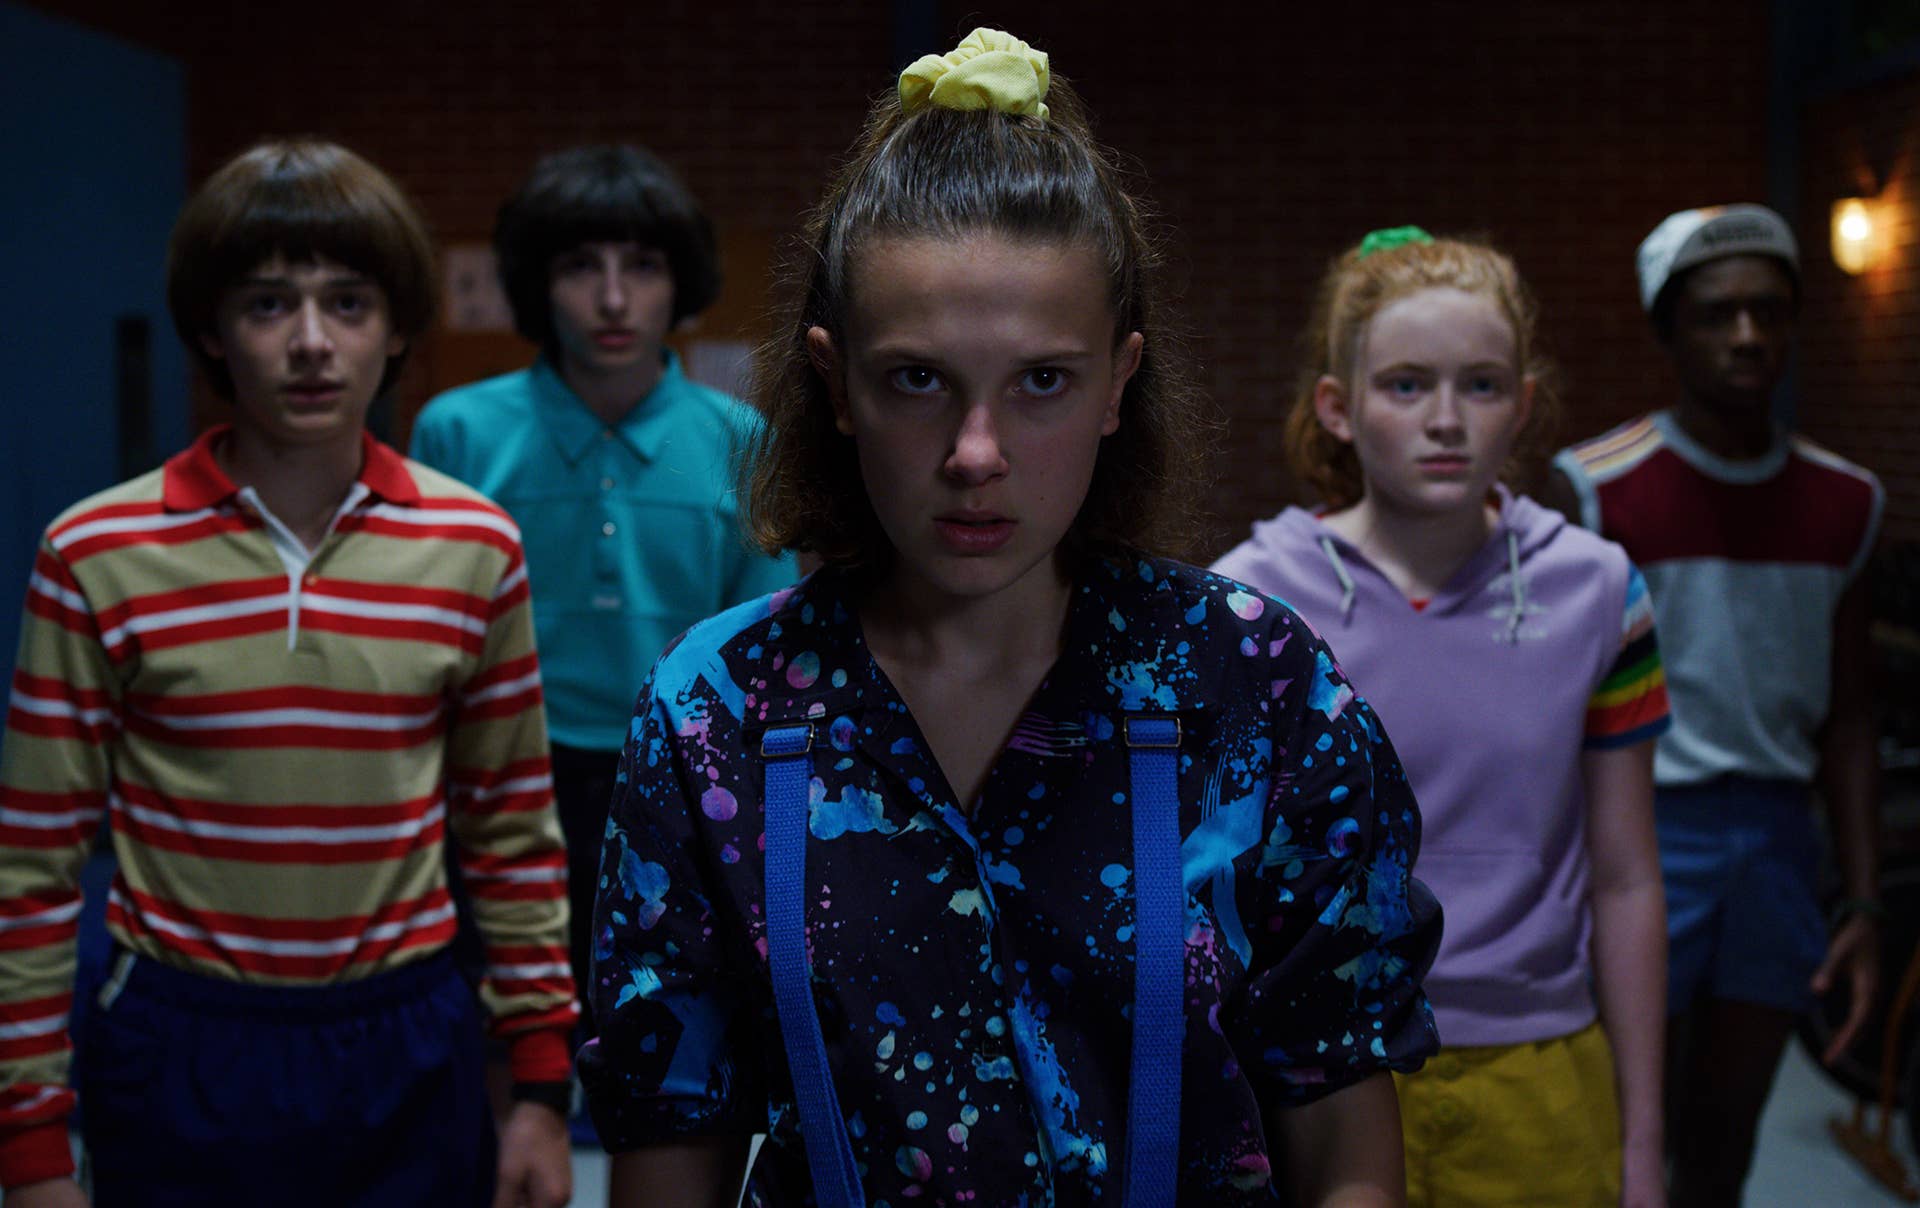 Stranger Things 4' Is Now Netflix's Top English-Language TV Season of All  Time